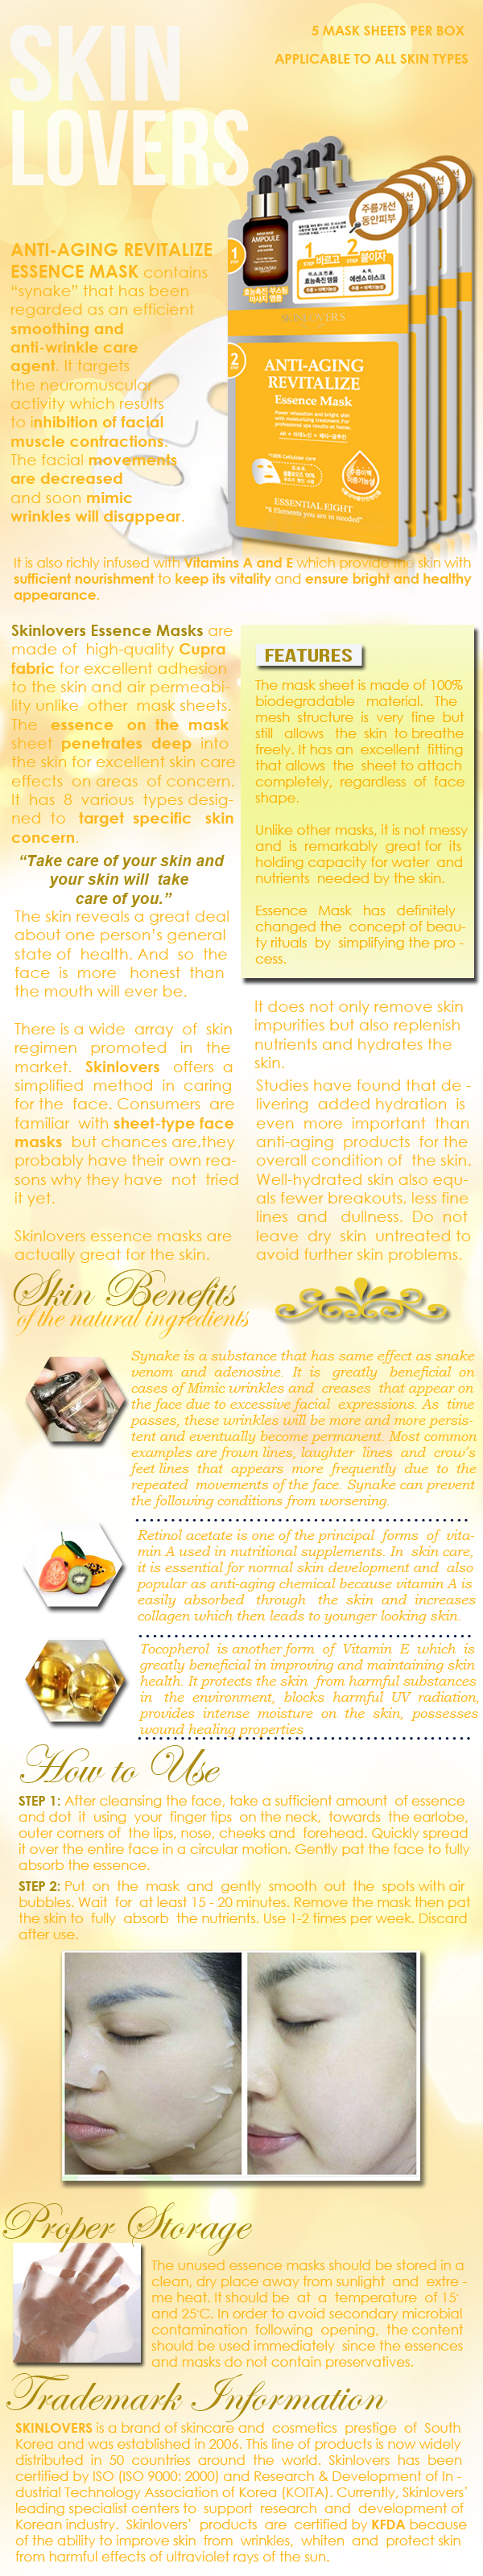 Skinlovers Anti-Aging Revitalize Essence Mask Product Information